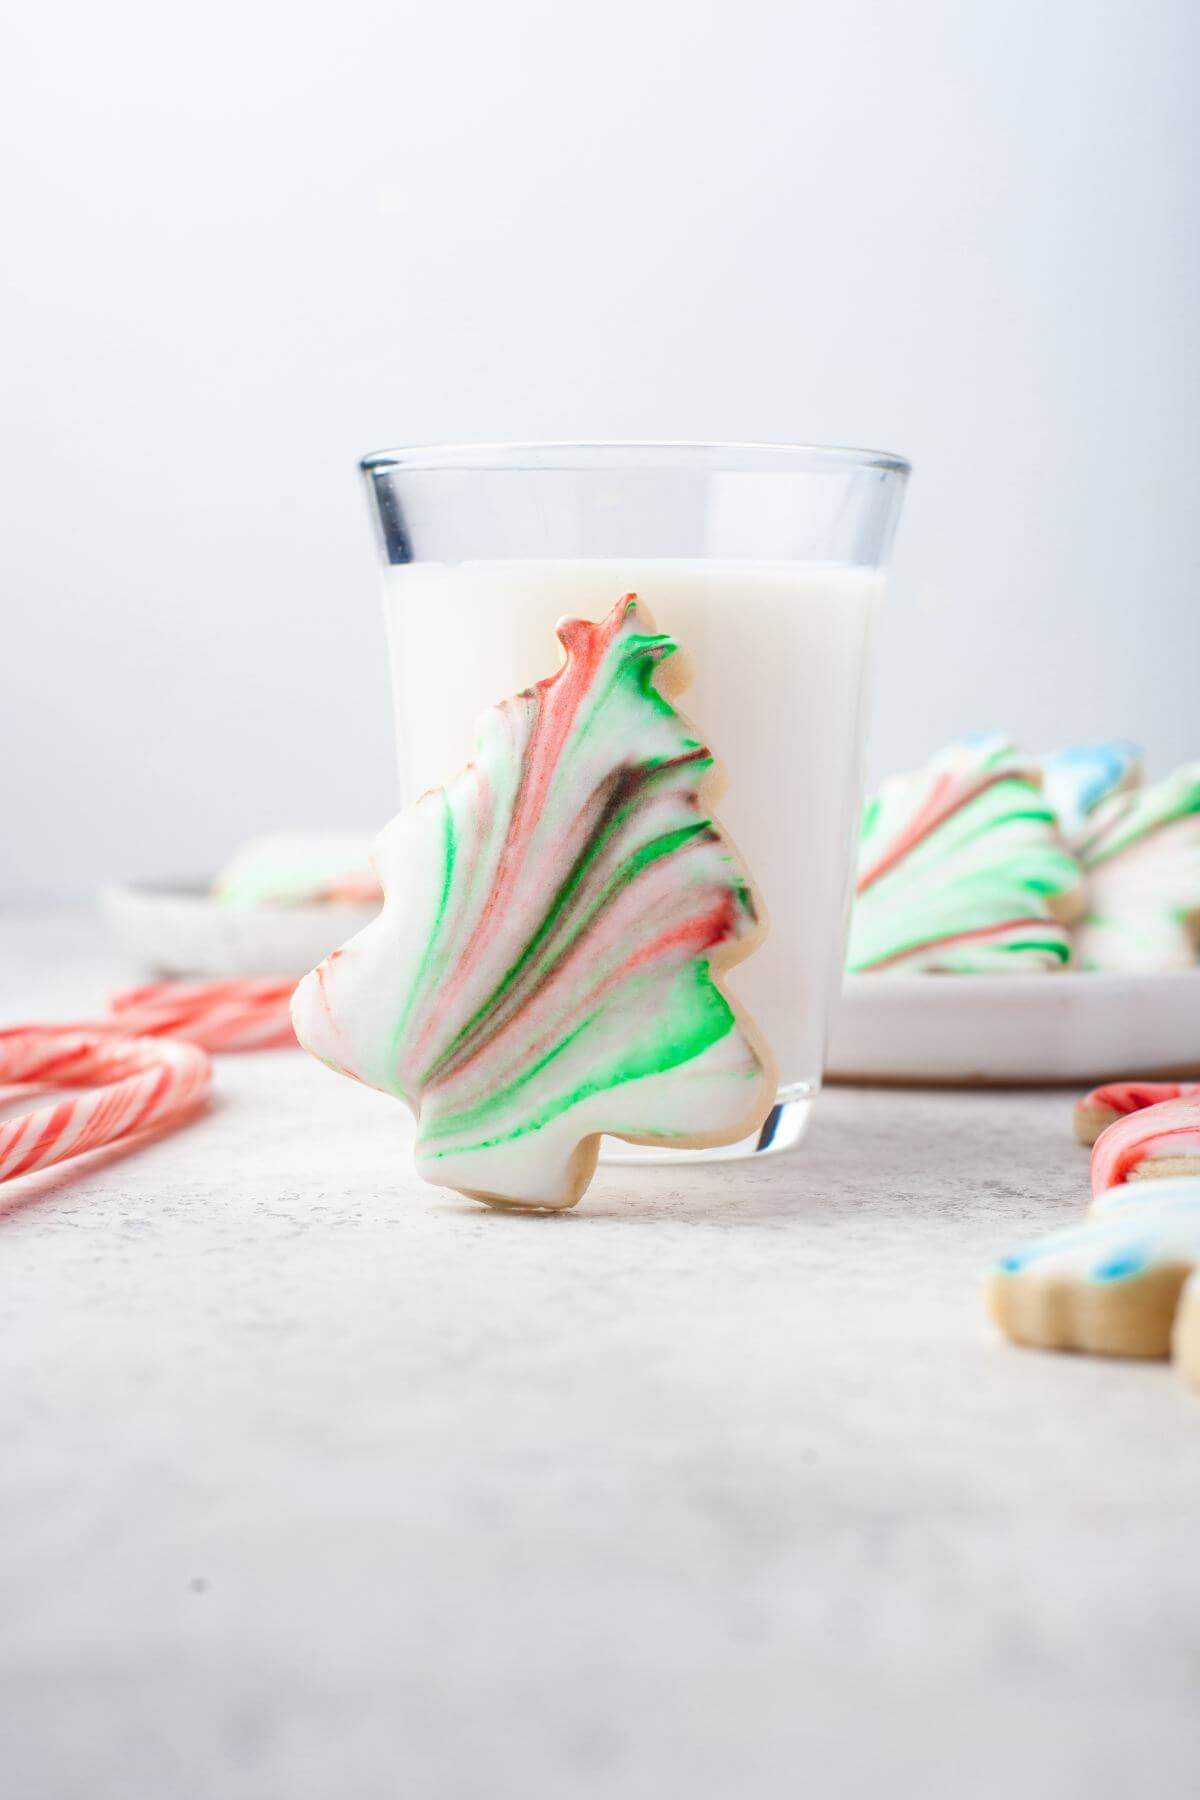 Marbled sugar cookie shaped like Christmas tree props up on milk glass.